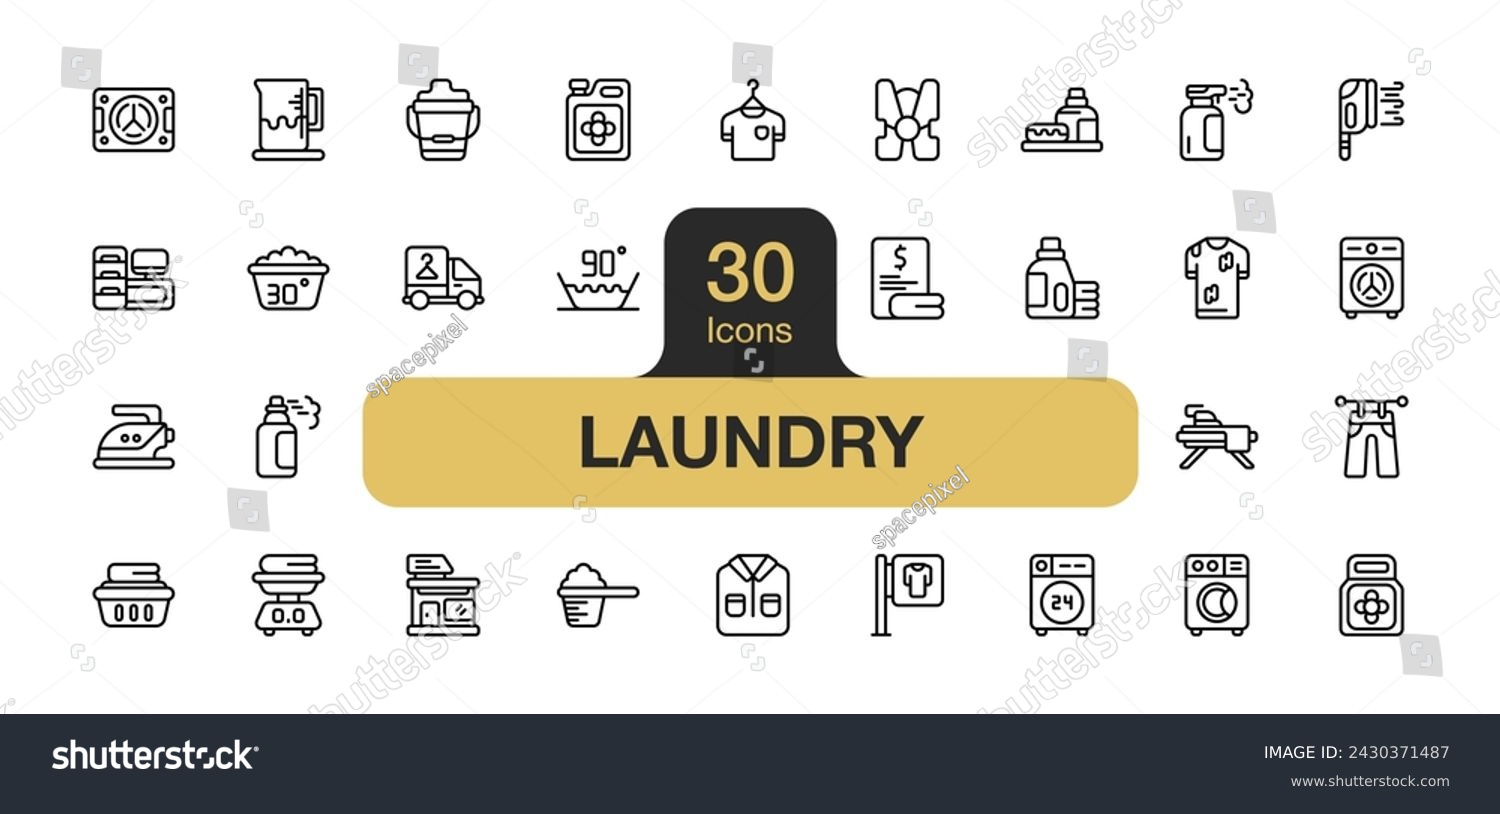 SVG of Set of 30 Laundry icon element sets. Includes Washing Machine, Jeans, Shirt, Delivery Truck, Chlorine, Clothespin, Sign, Detergent, and More. Outline icons vector collection. svg